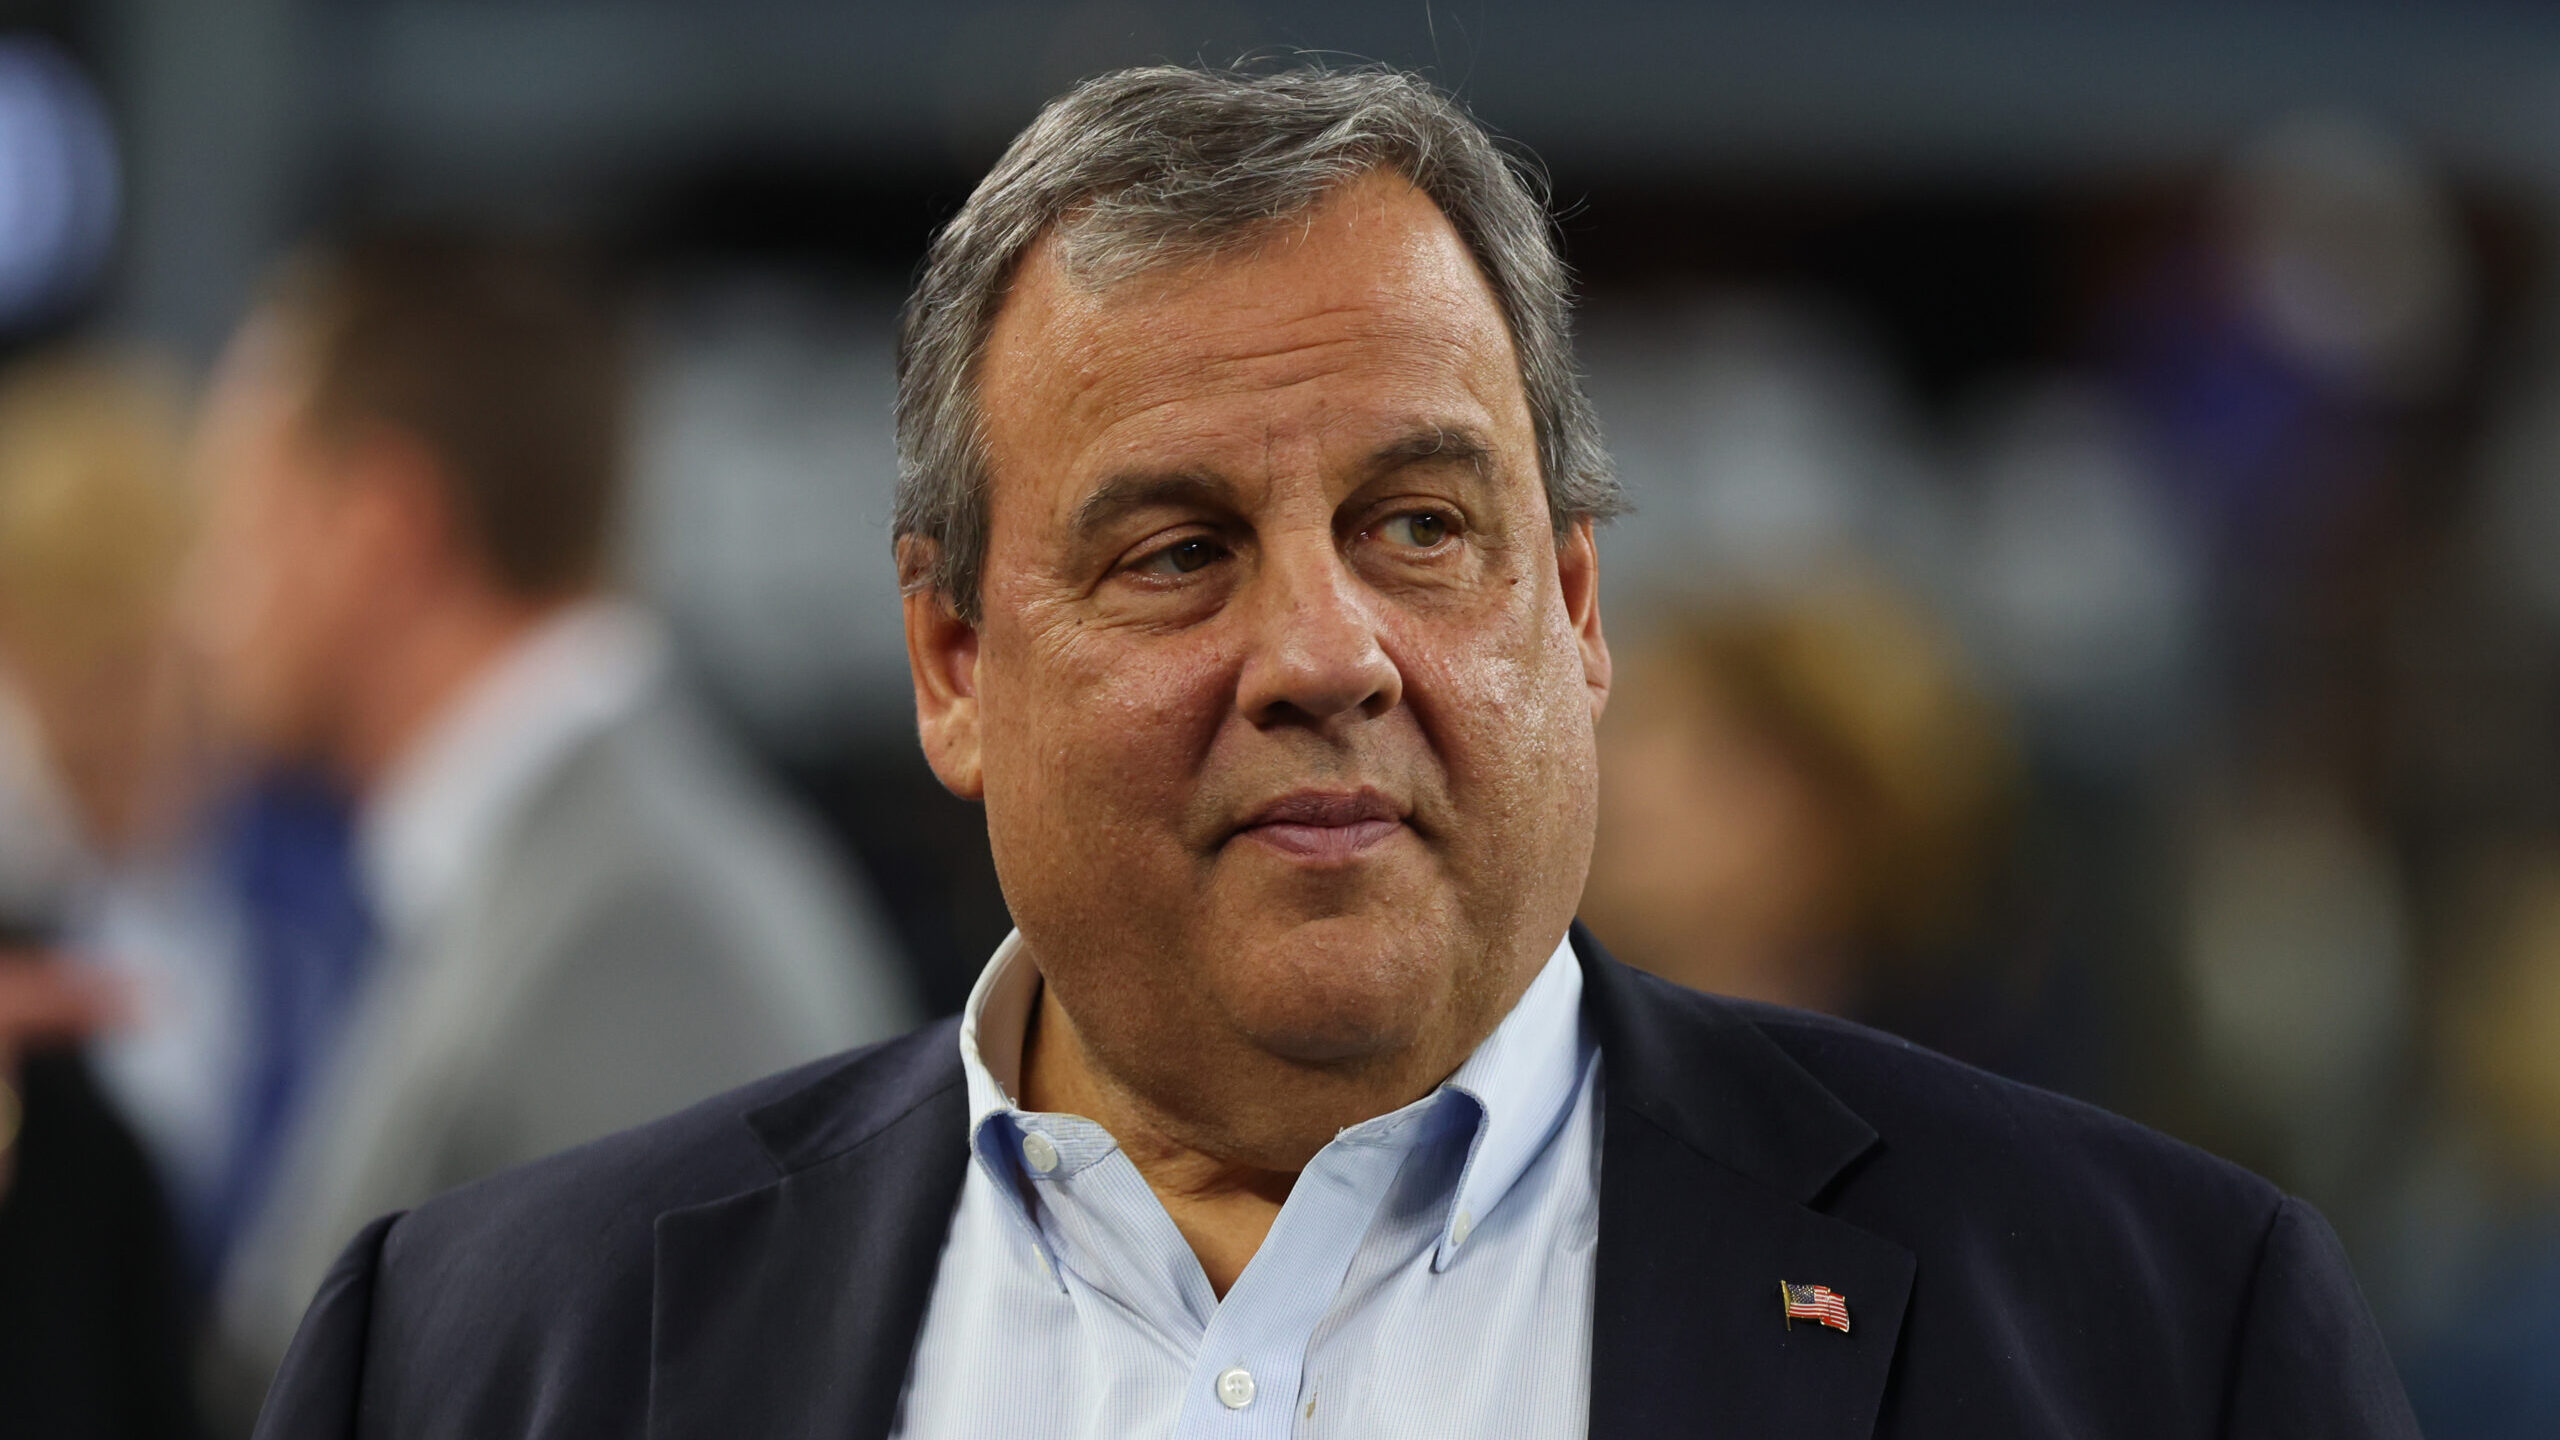 Former New Jersey Gov. Chris Christie is set to launch his bid for the Republican nomination for pr...